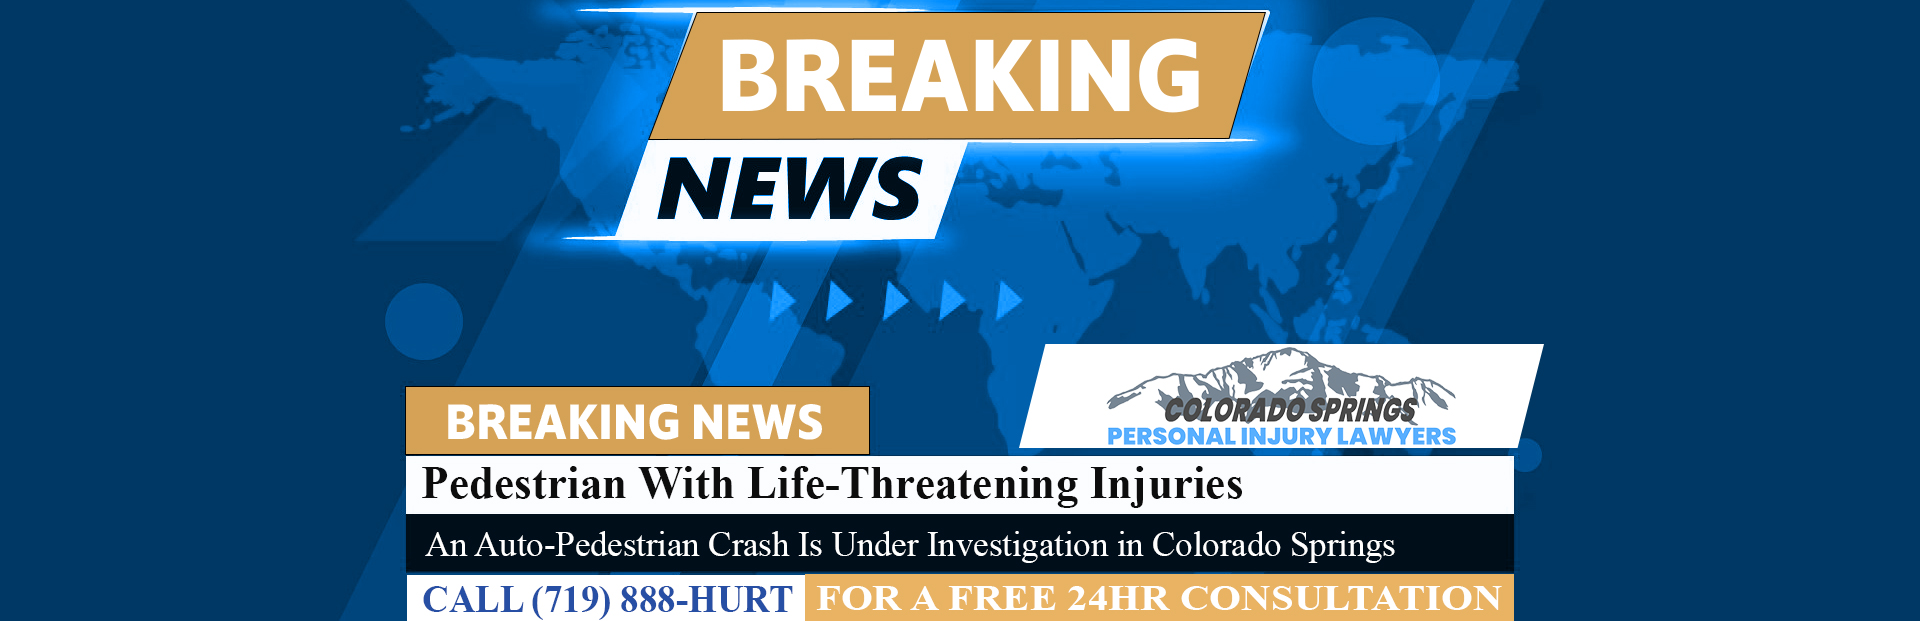 [04-22-24] Pedestrian With Life-Threatening Injuries After Crash With Car in Colorado Springs